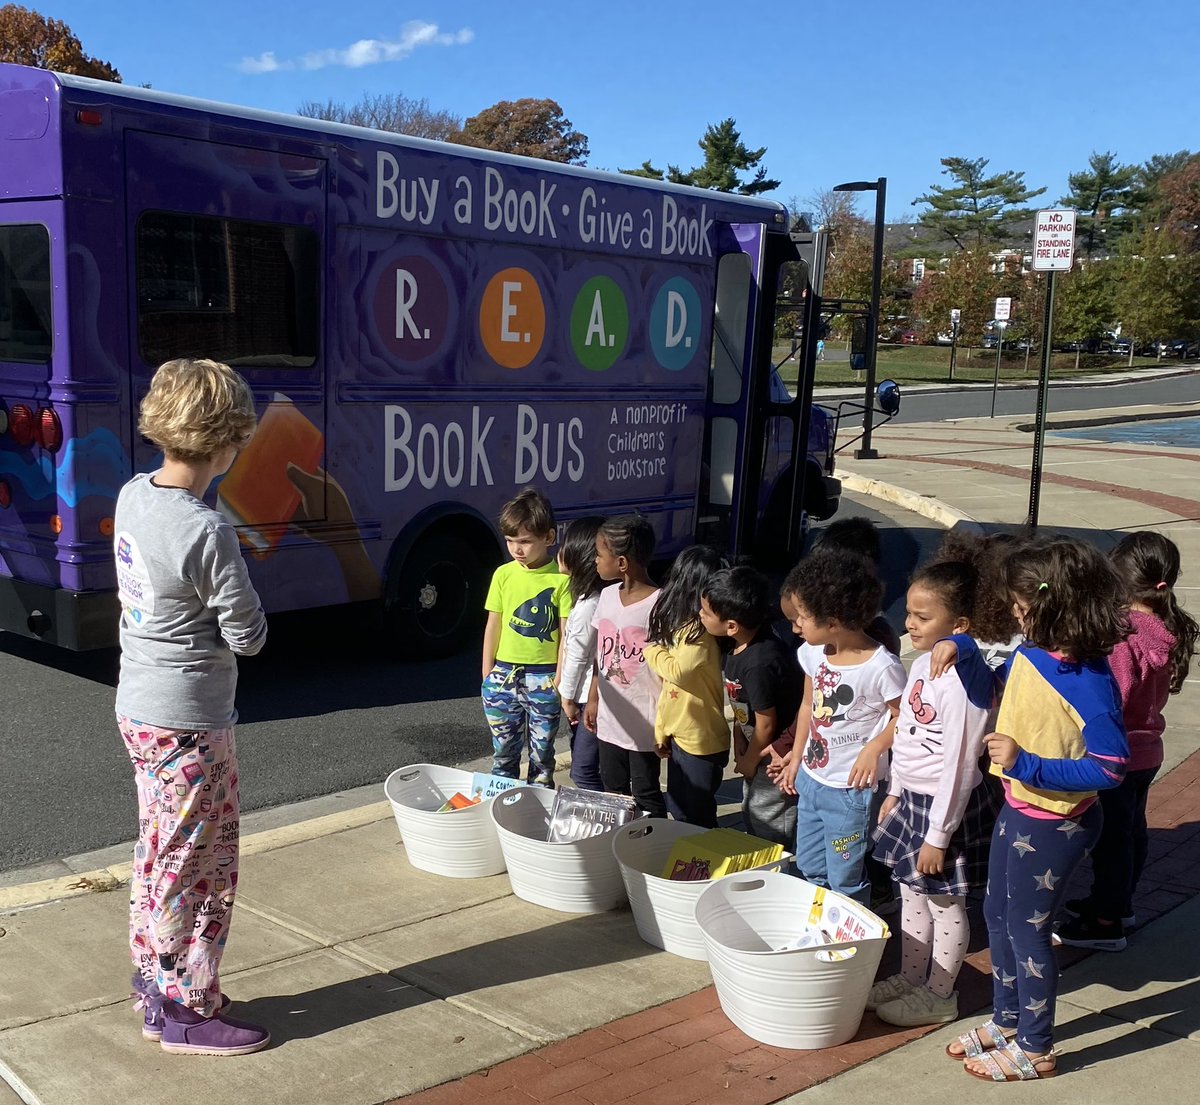 Pre-K was so excited to have the purple book bus visit us today! Thanks <a target='_blank' href='http://twitter.com/ReadEarlyDaily'>@ReadEarlyDaily</a> for the great book choices! <a target='_blank' href='http://twitter.com/AbingdonGIFT'>@AbingdonGIFT</a> <a target='_blank' href='http://twitter.com/APS_EarlyChild'>@APS_EarlyChild</a> <a target='_blank' href='https://t.co/wk4g6EbHR6'>https://t.co/wk4g6EbHR6</a>